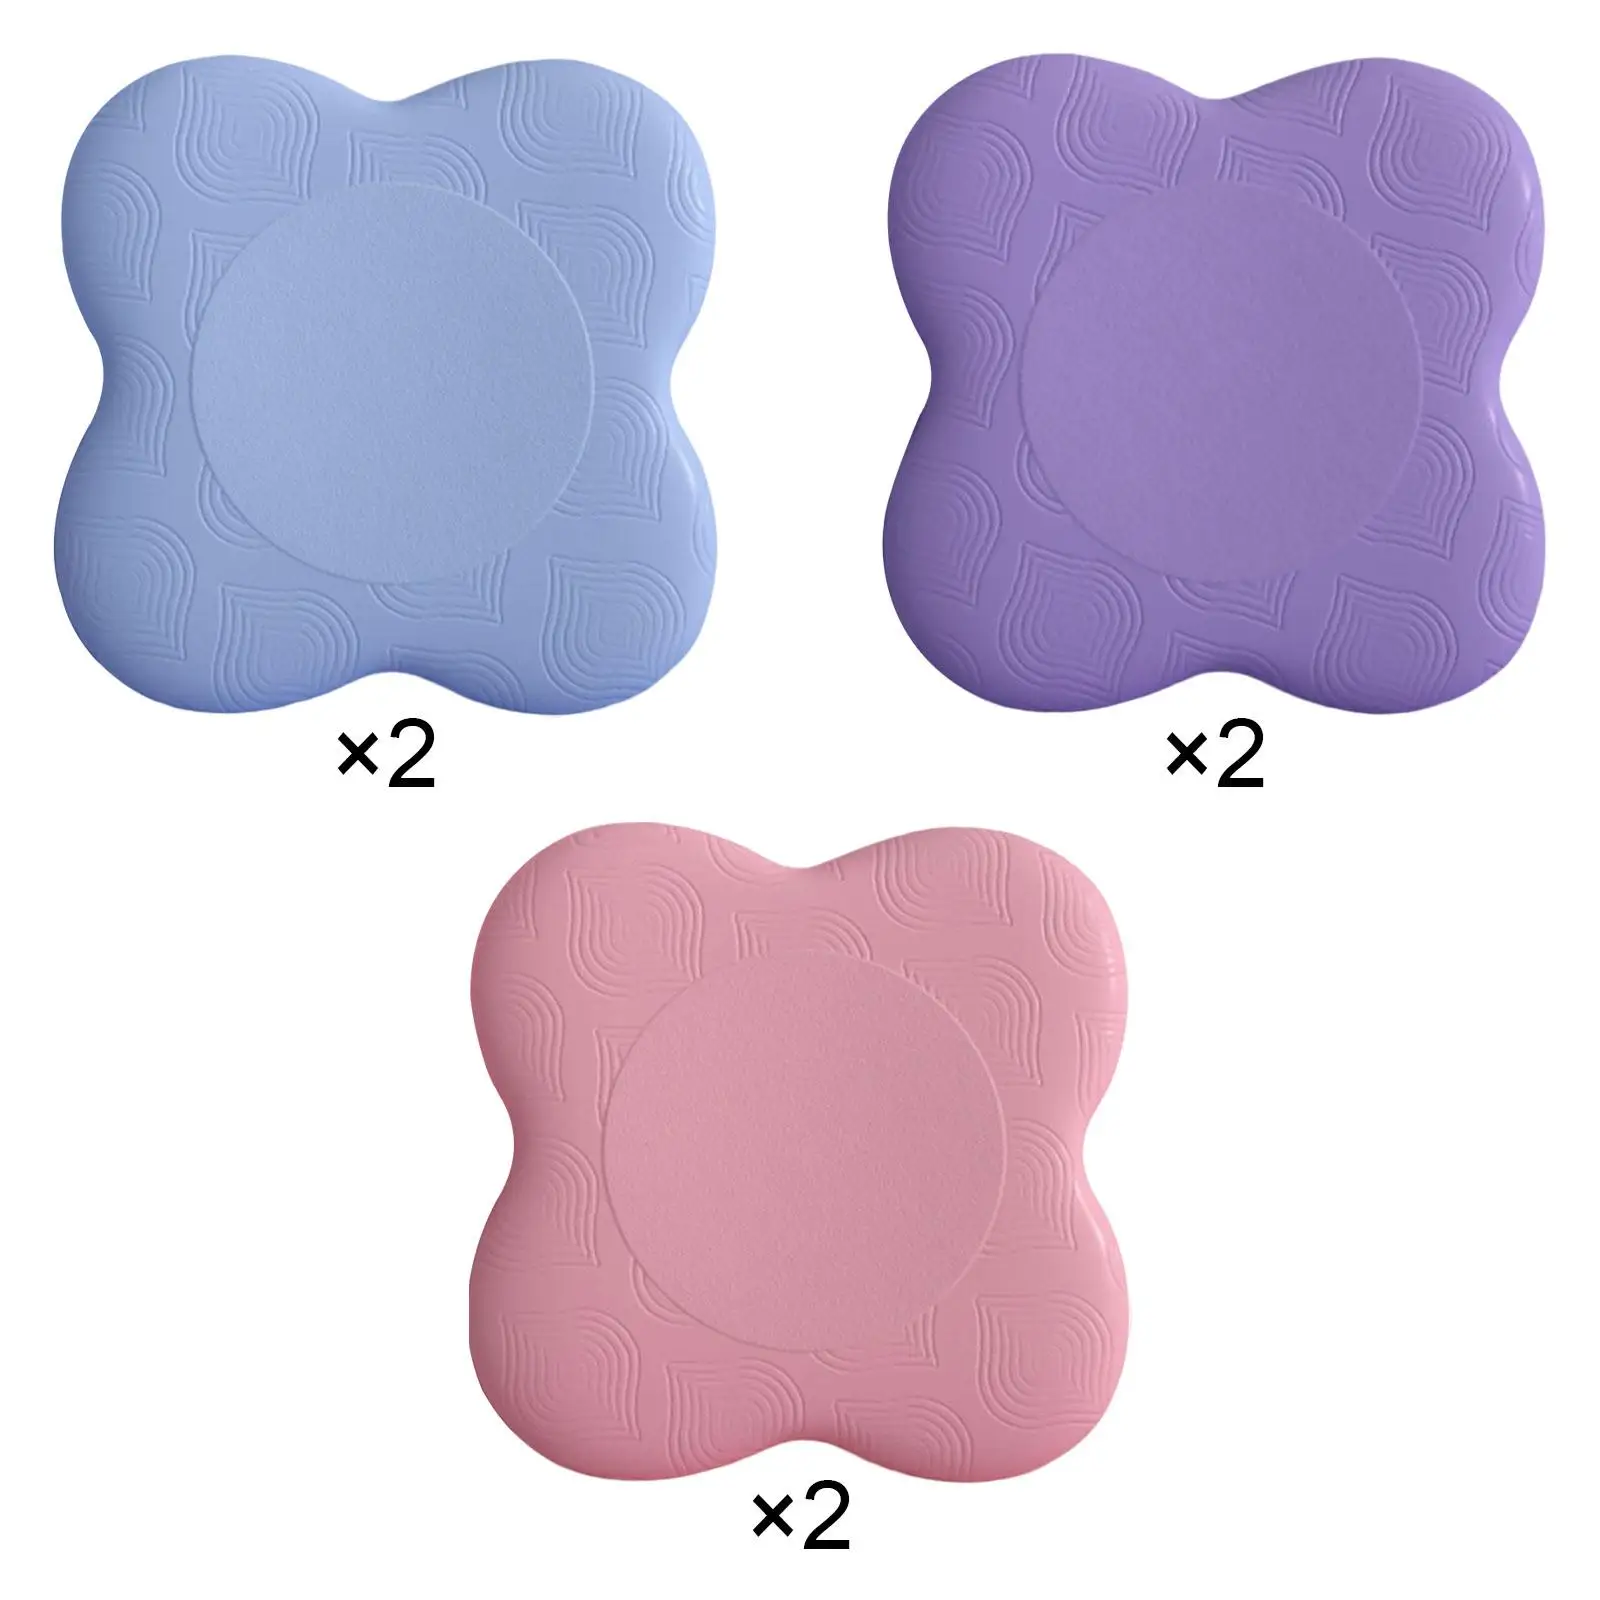 2x Yoga Knee Pad Cushion Yoga Elbow Mat Non Slip Kneeling Support Balance Cushion for Elbow Ankle Knee Hands Pilates